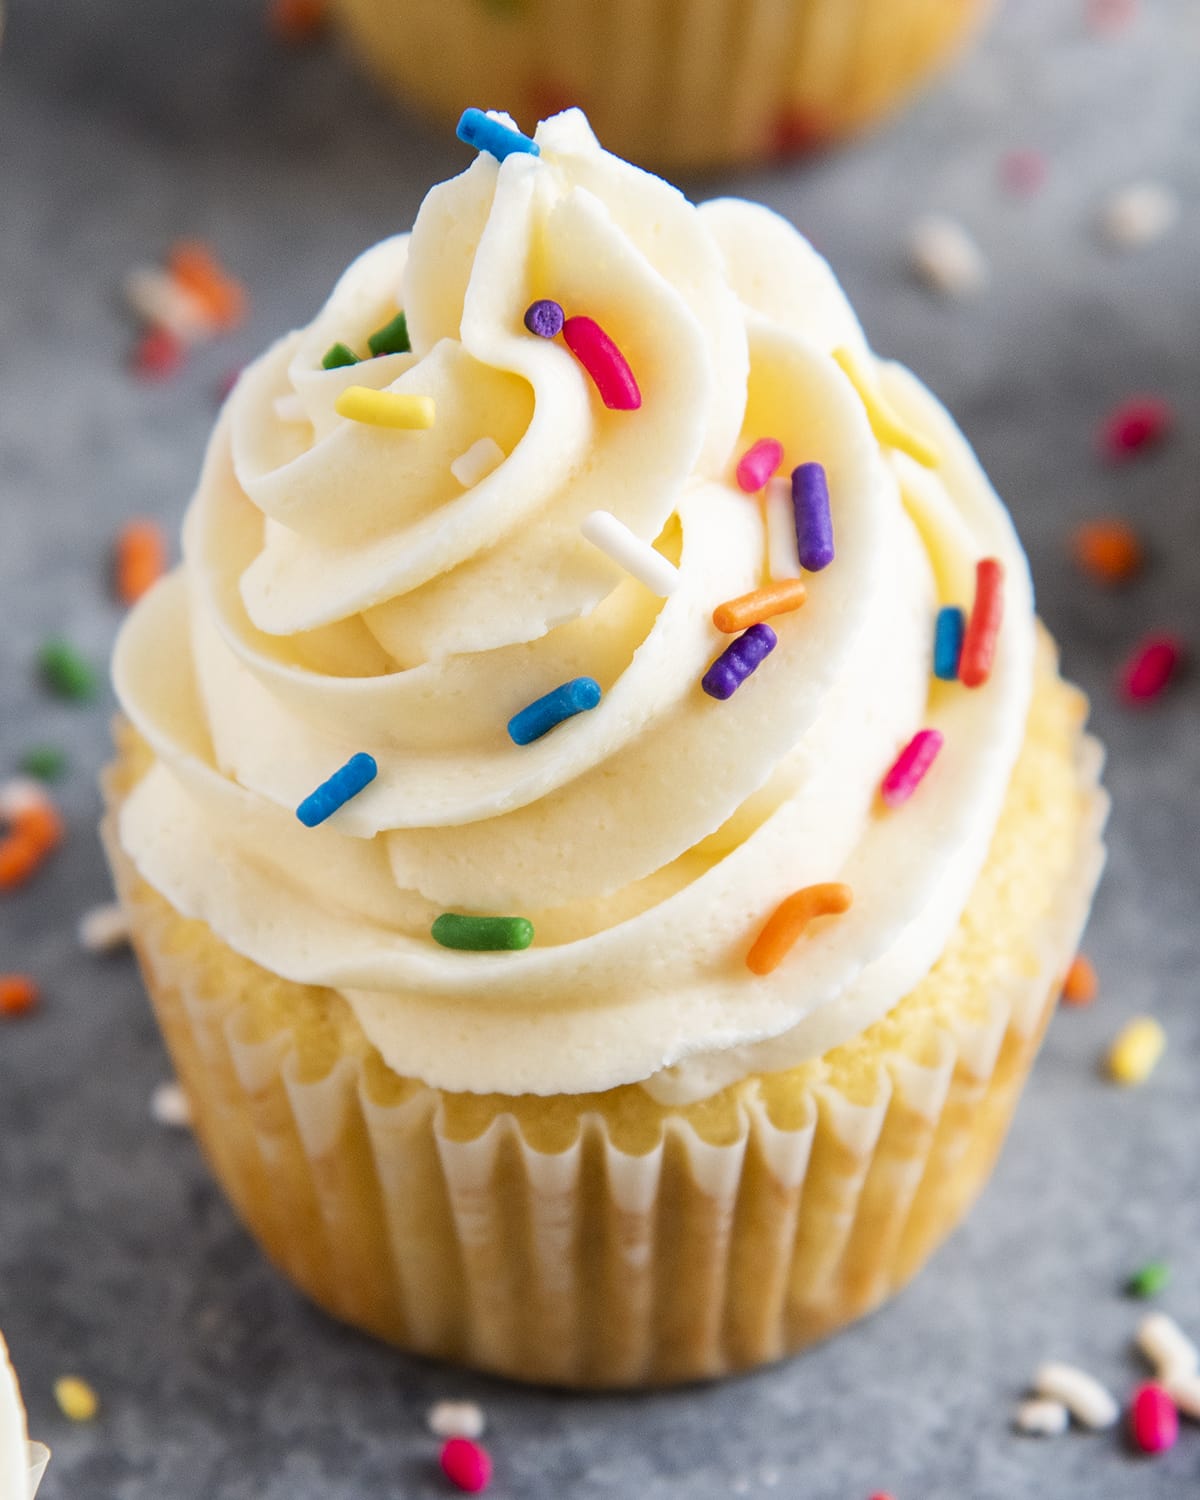 A close up of buttercream frosting topped with sprinkles on a cupcake.